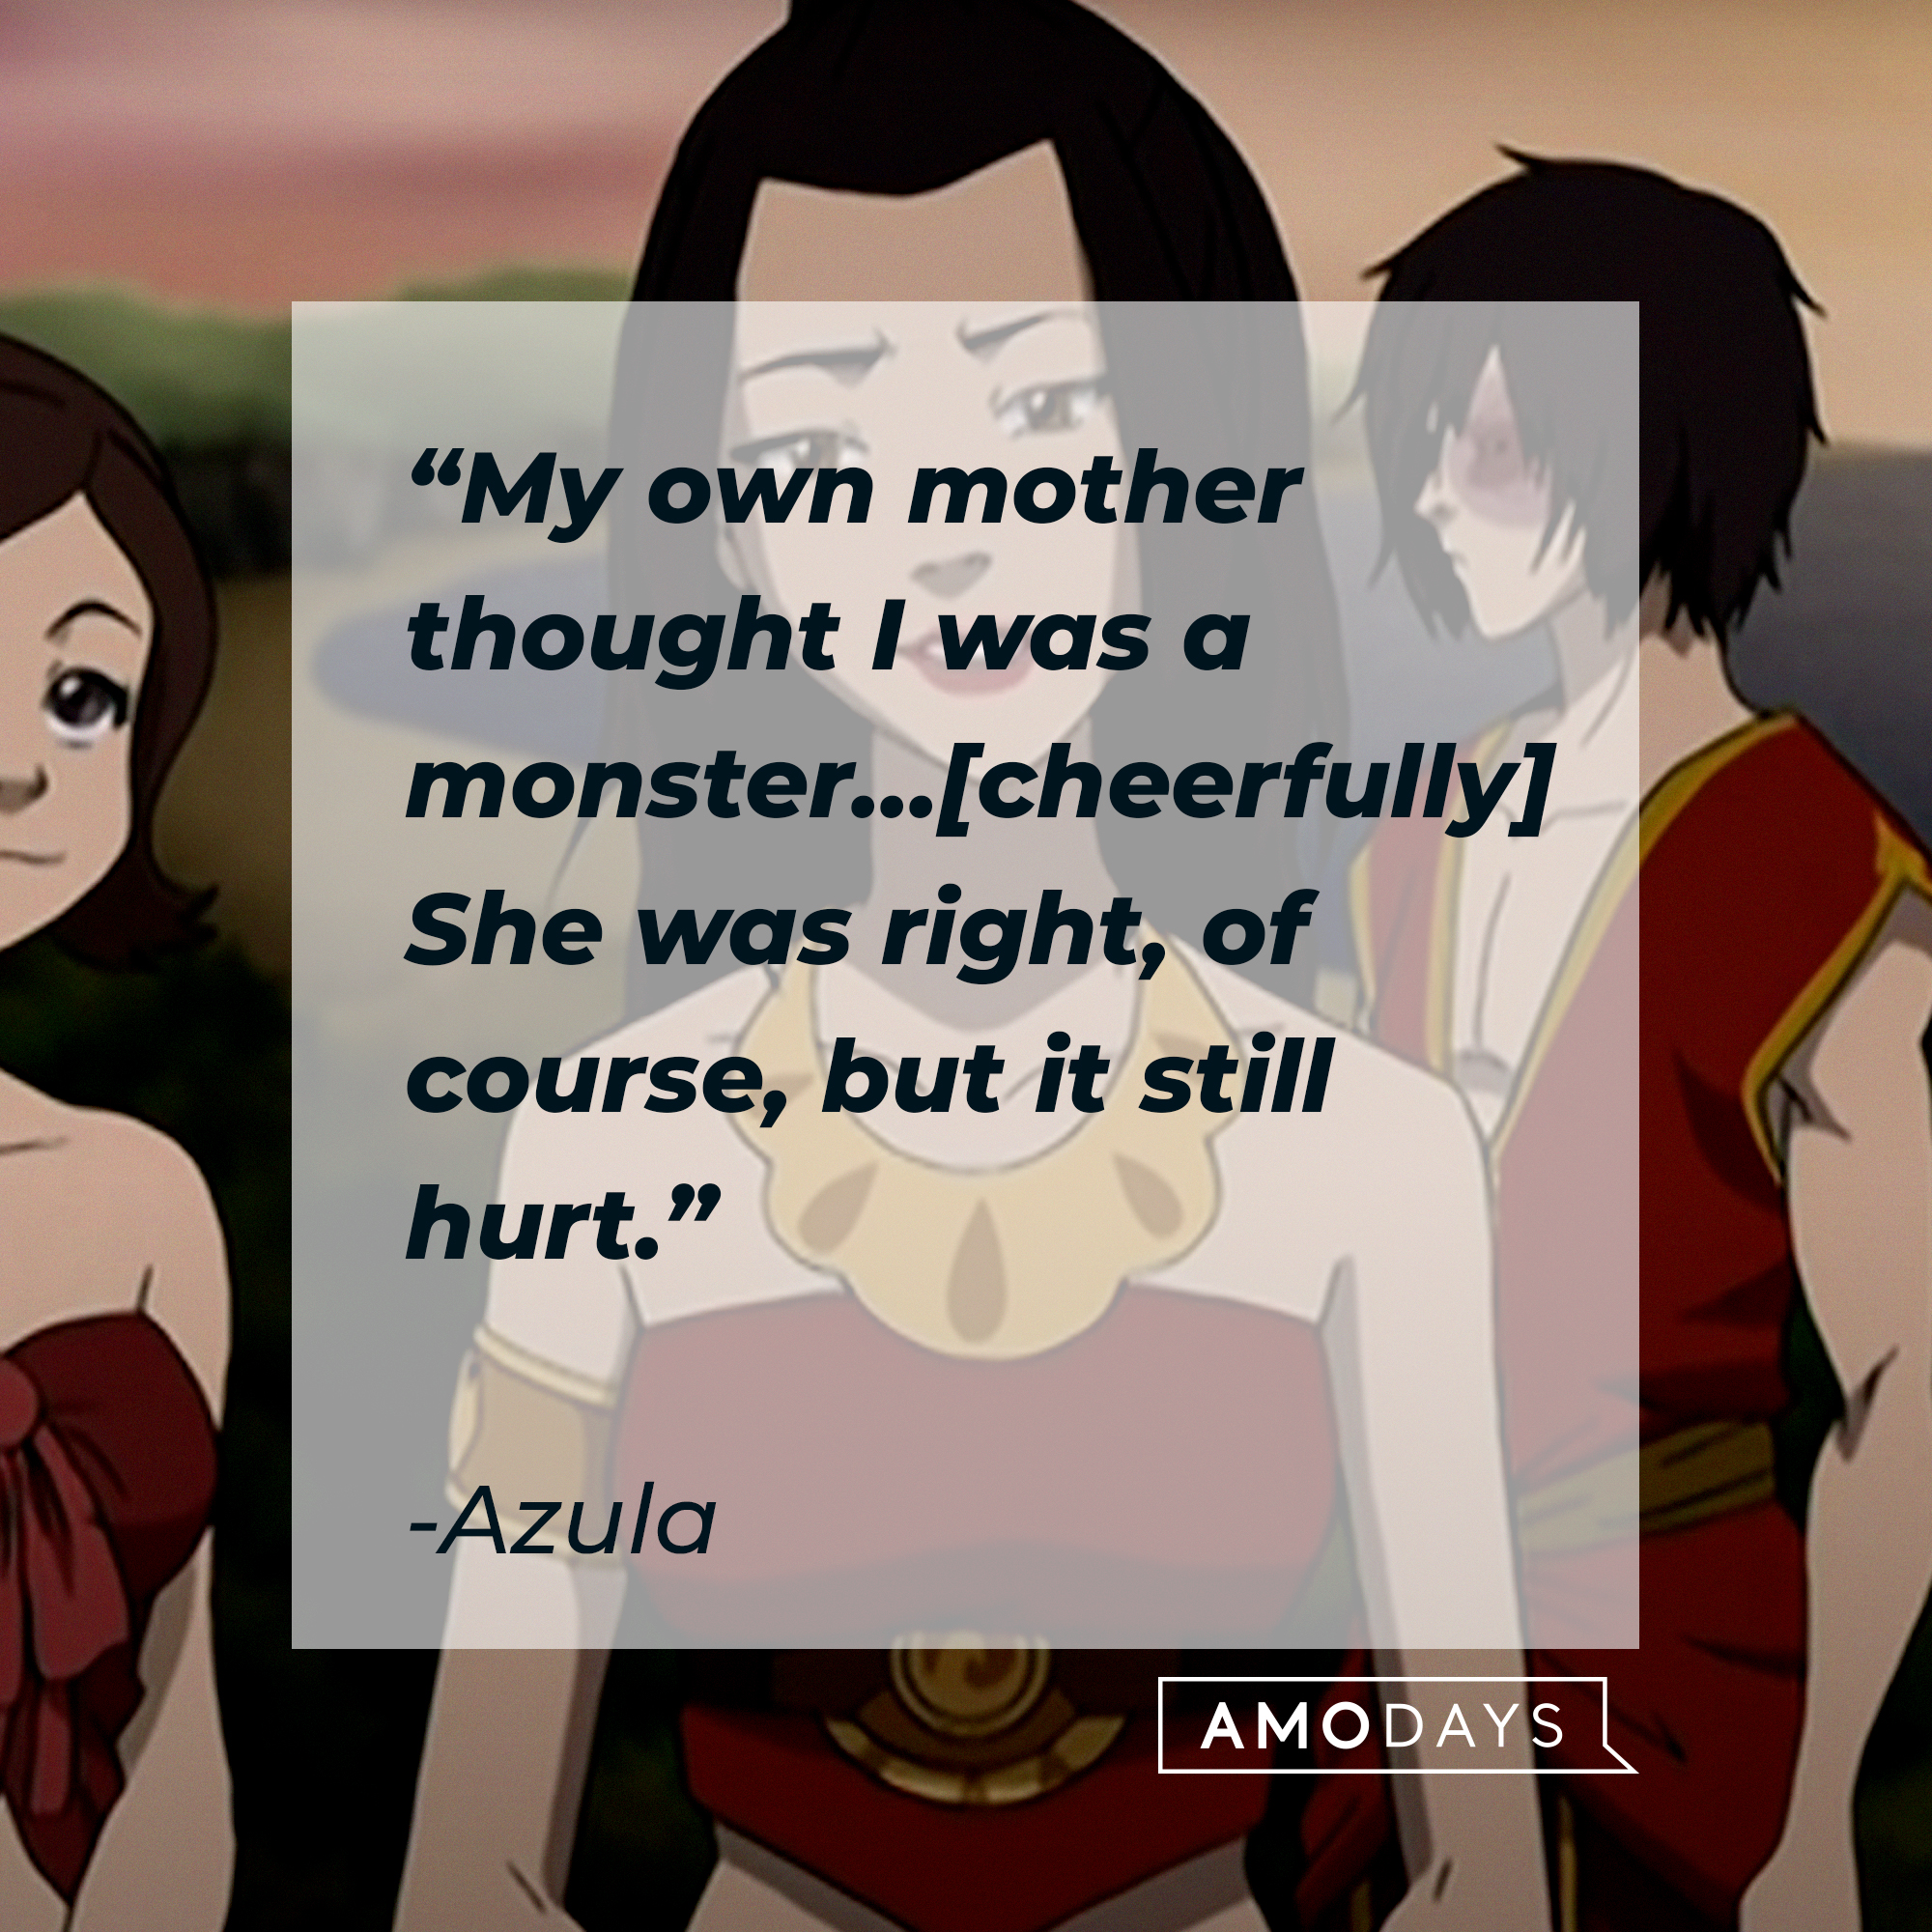 Azula, with her quote: "My own mother thought I was a monster...[cheerfully] She was right, of course, but it still hurt." | Source: Youtube.com/TeamAvatar